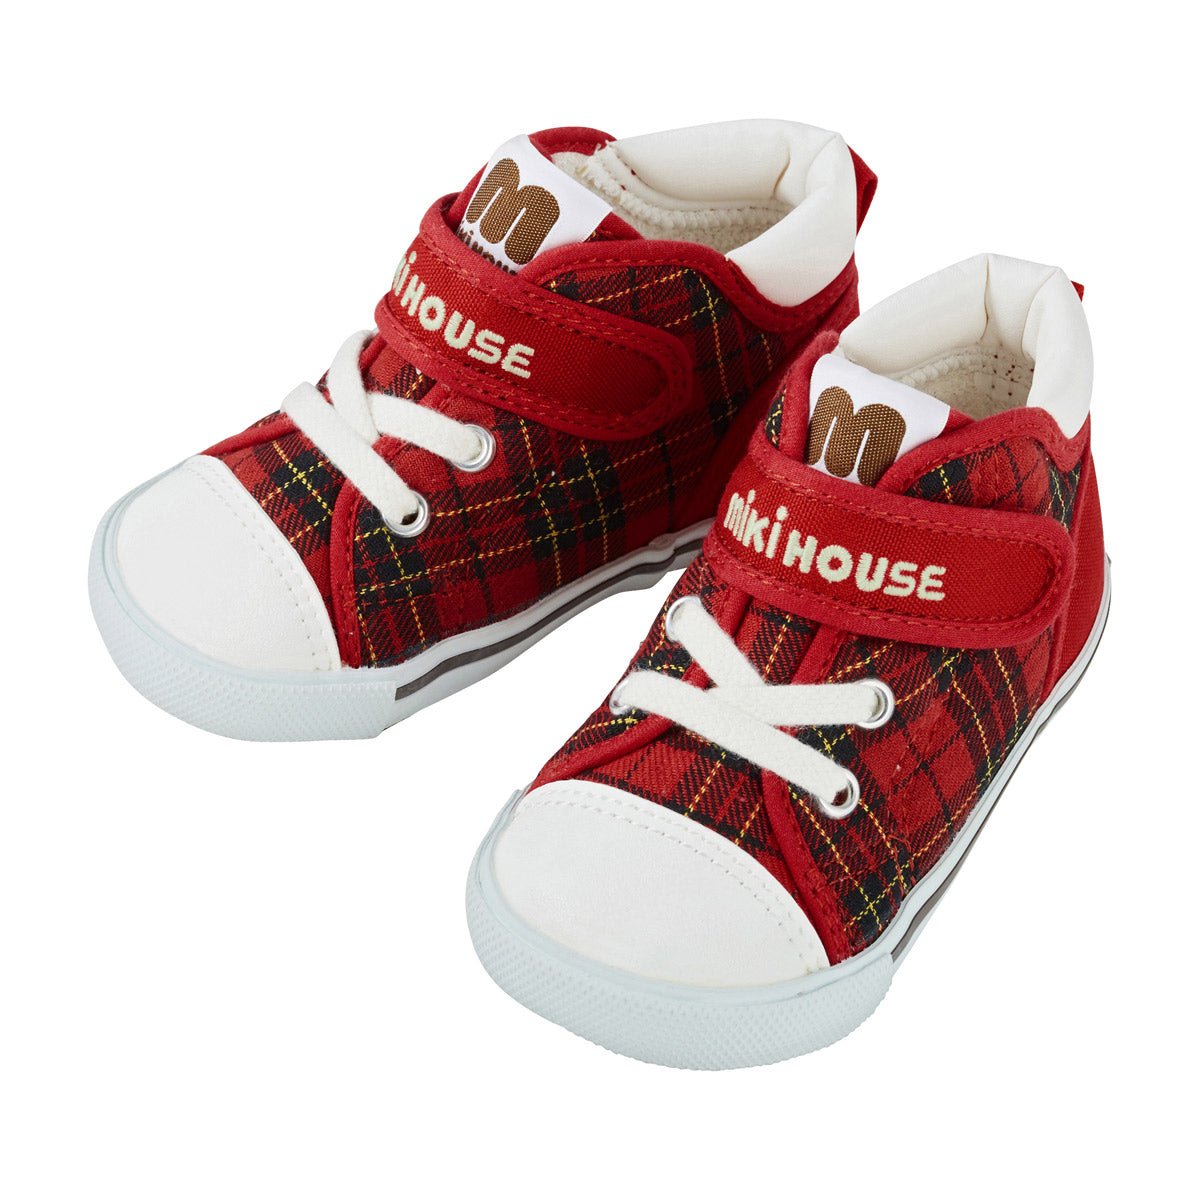 High Top Second Shoes - Stylish Plaid